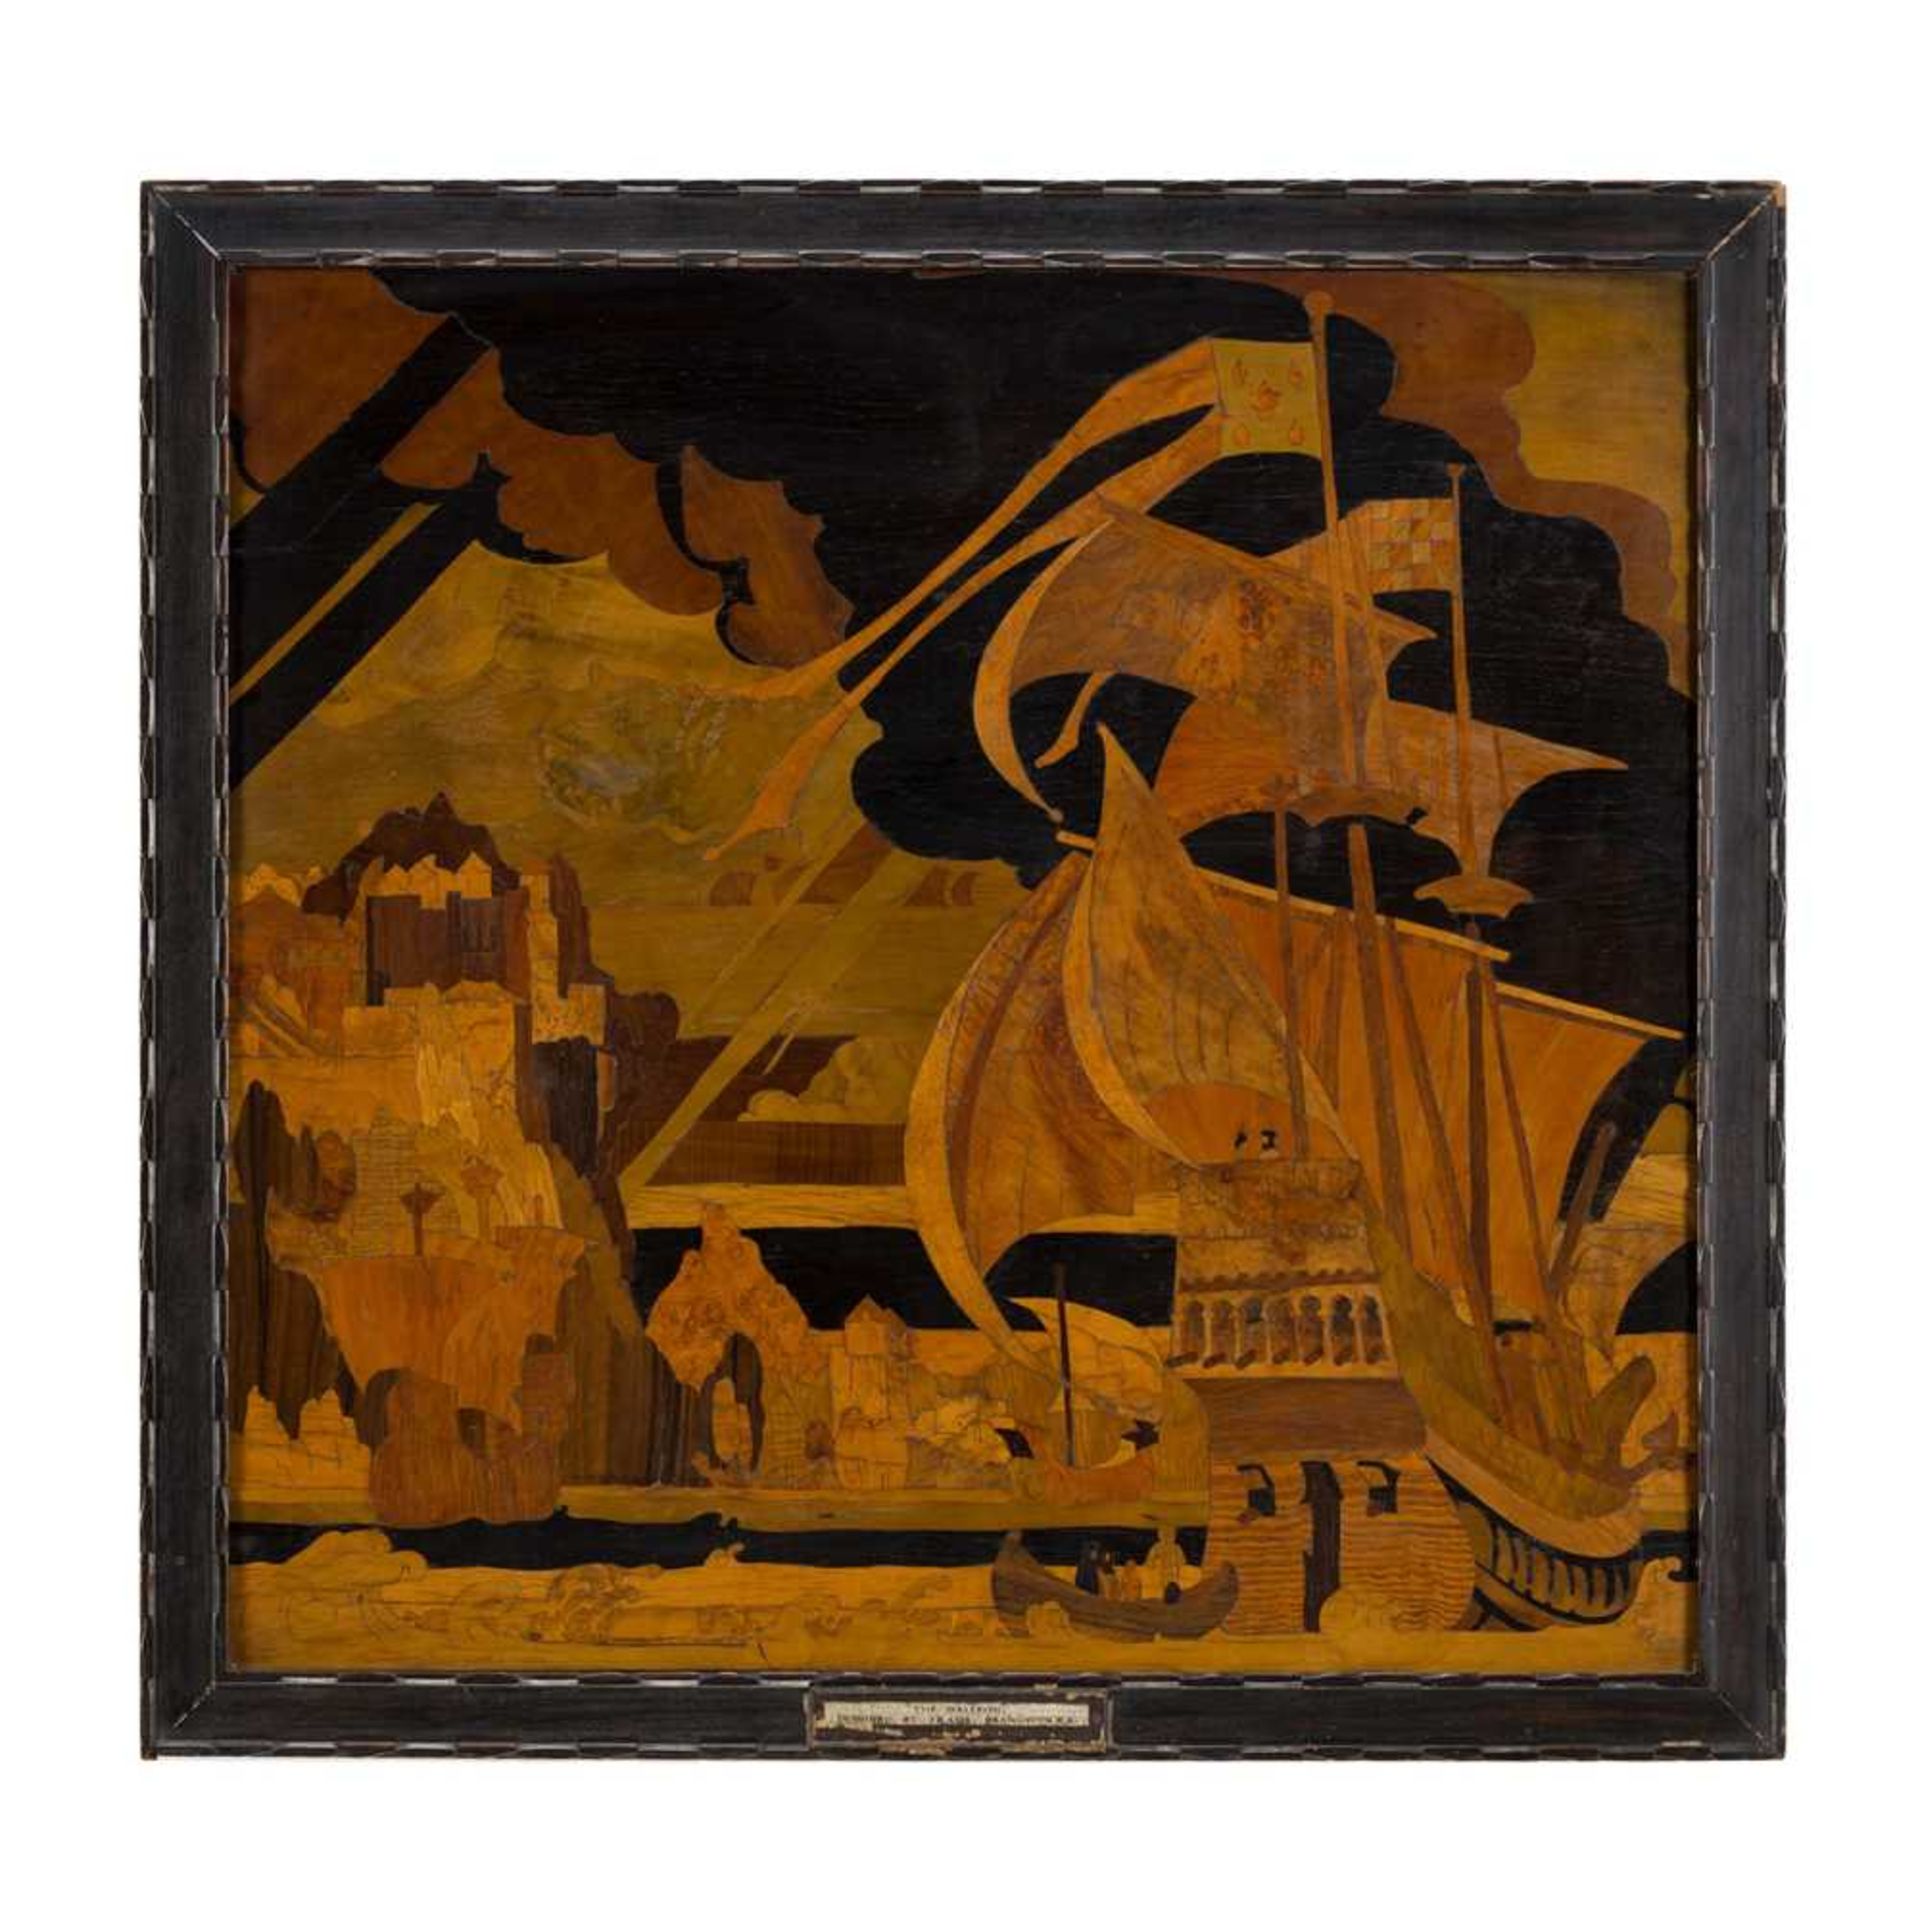 § SIR FRANK BRANGWYN R.A., R.W.S., R.B.A. (BRITISH 1867-1956) FOR ROWLEY GALLERY, LONDON THE GALLEON - Image 2 of 3